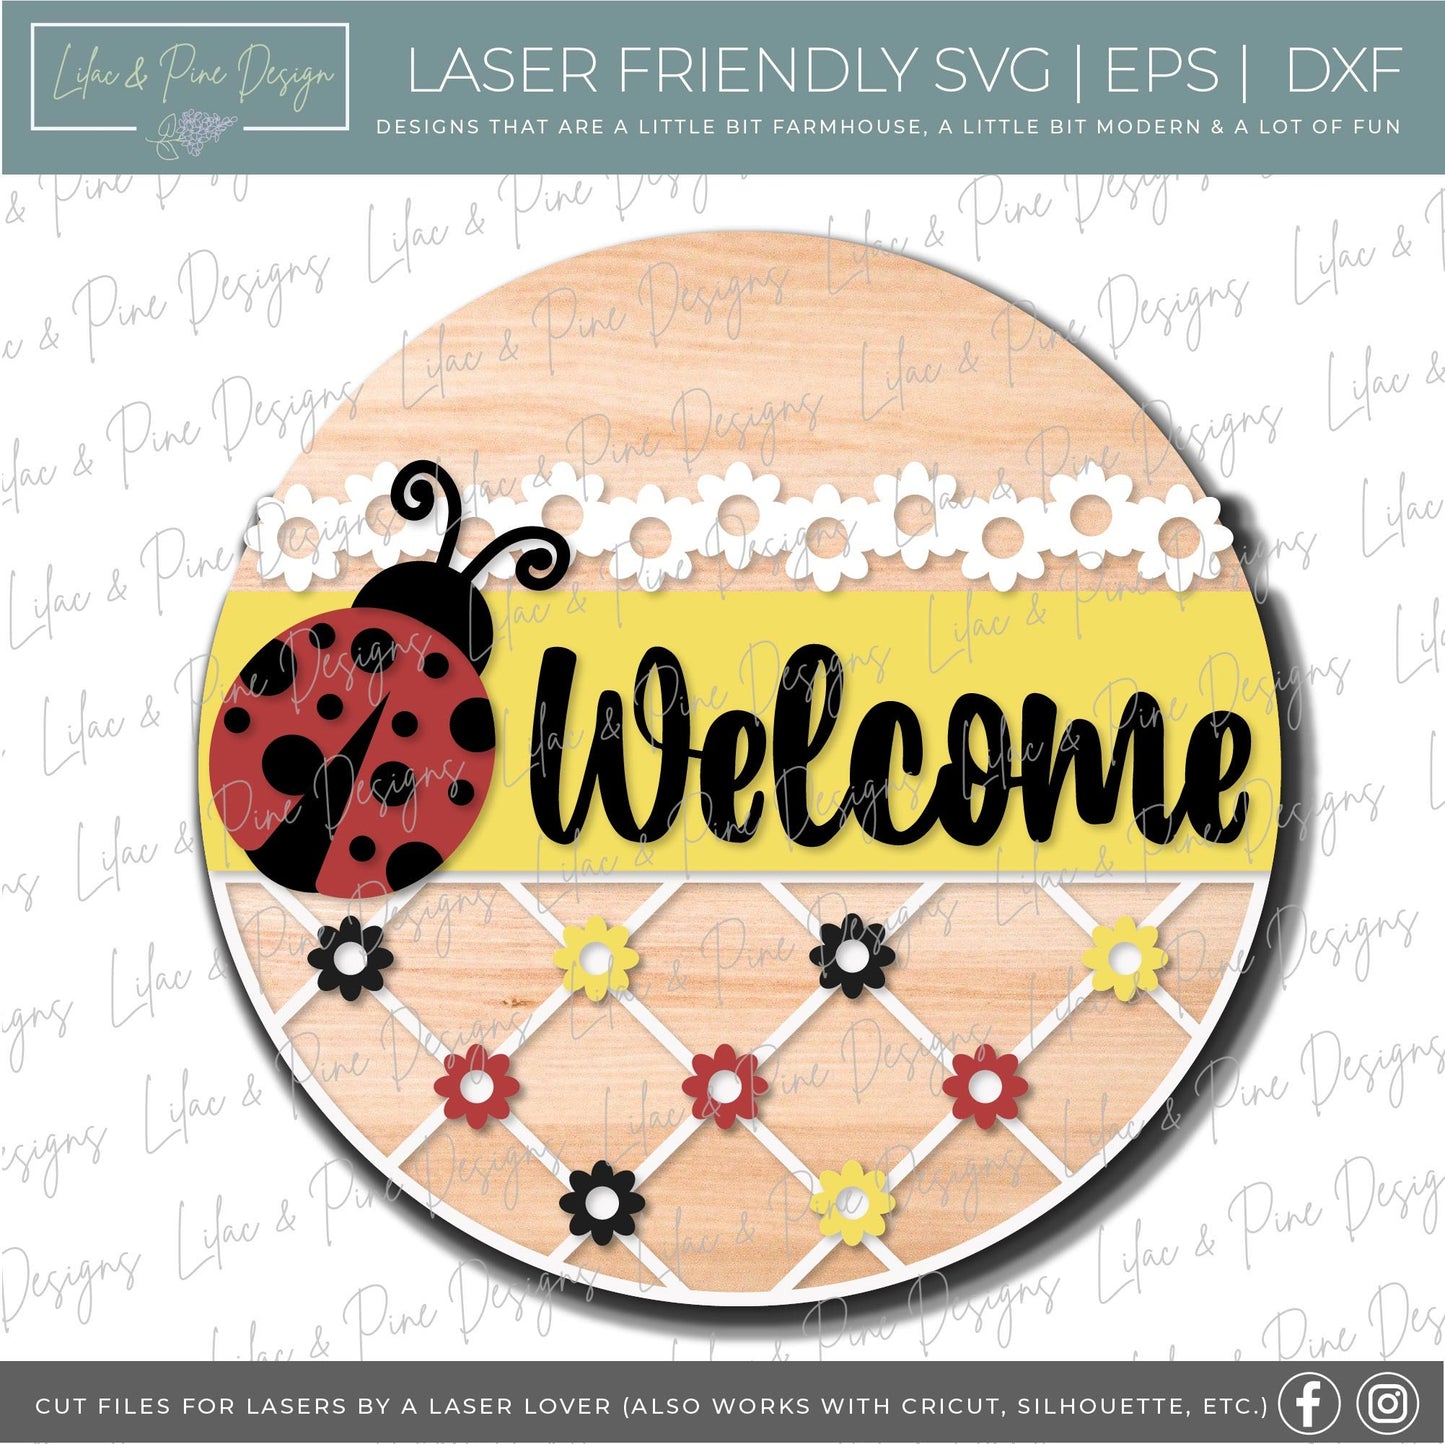 Ladybug Welcome door hanger SVG, Daisy Welcome sign, plaid and daisy svg, Ladybug sign, Summer decor, Glowforge cut file, laser SVG file